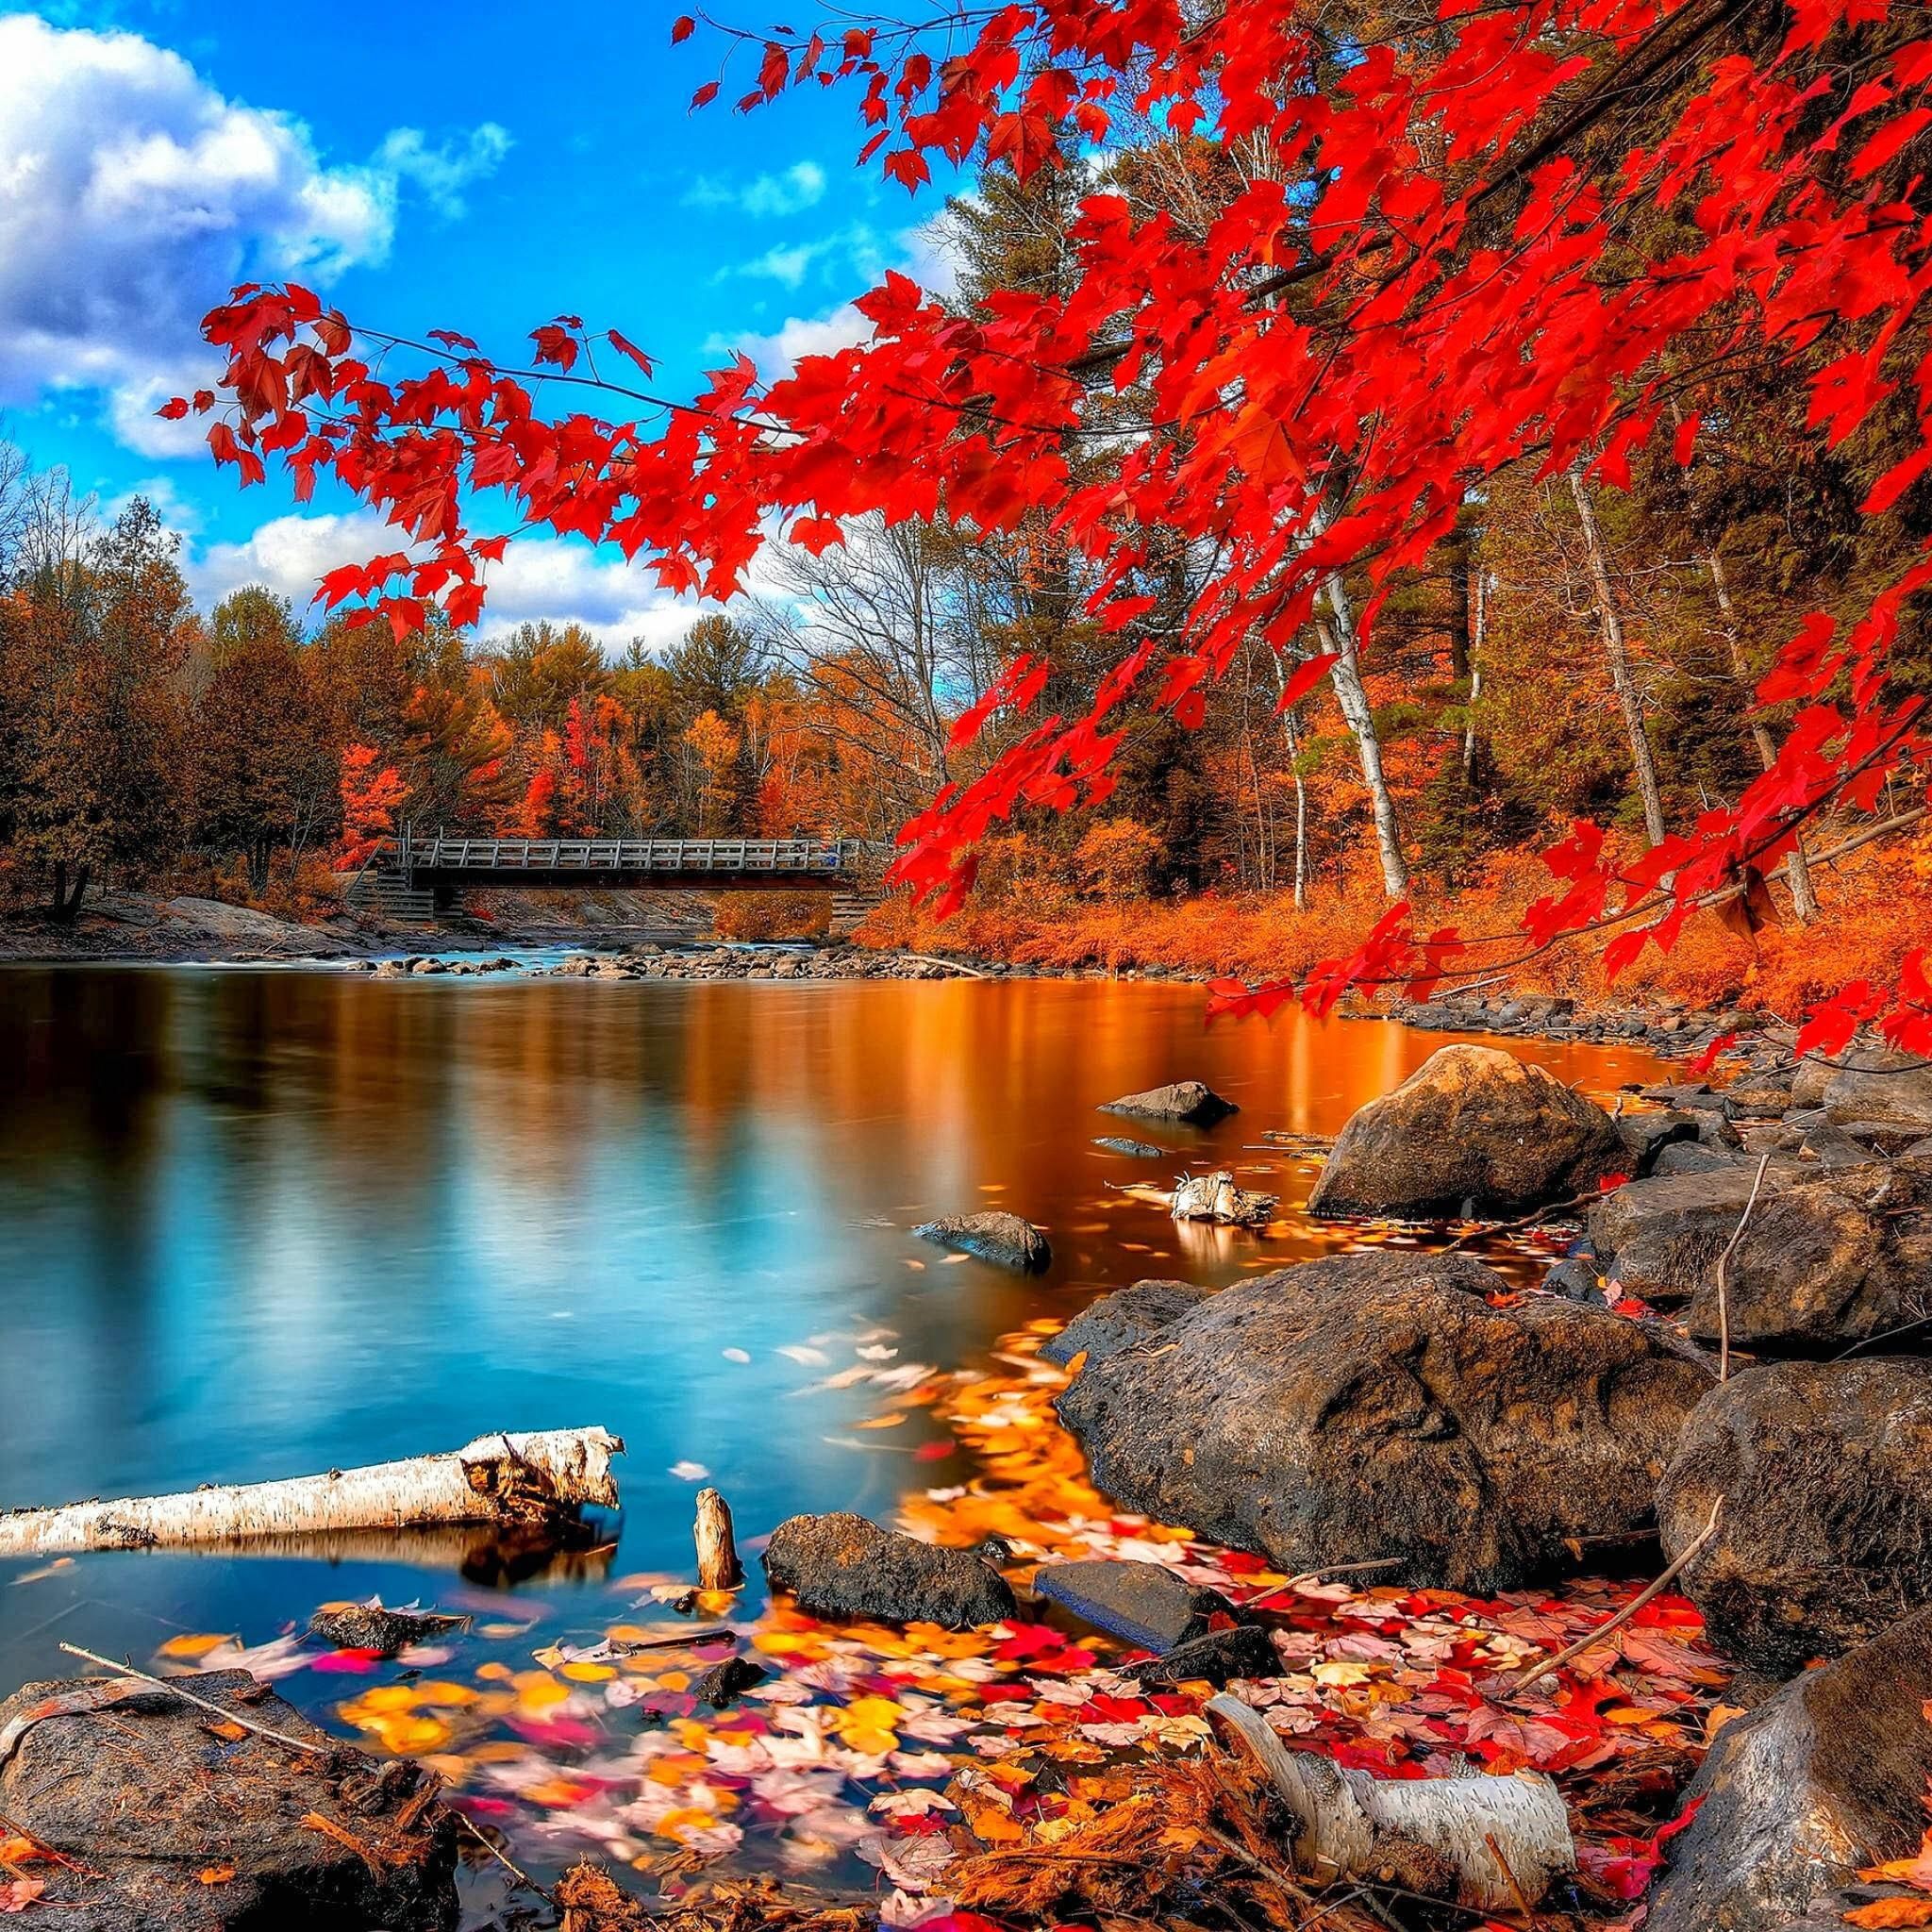 Nature Autumn Red Leaf Calm Lake Landscape iPad Air Wallpaper Free Download